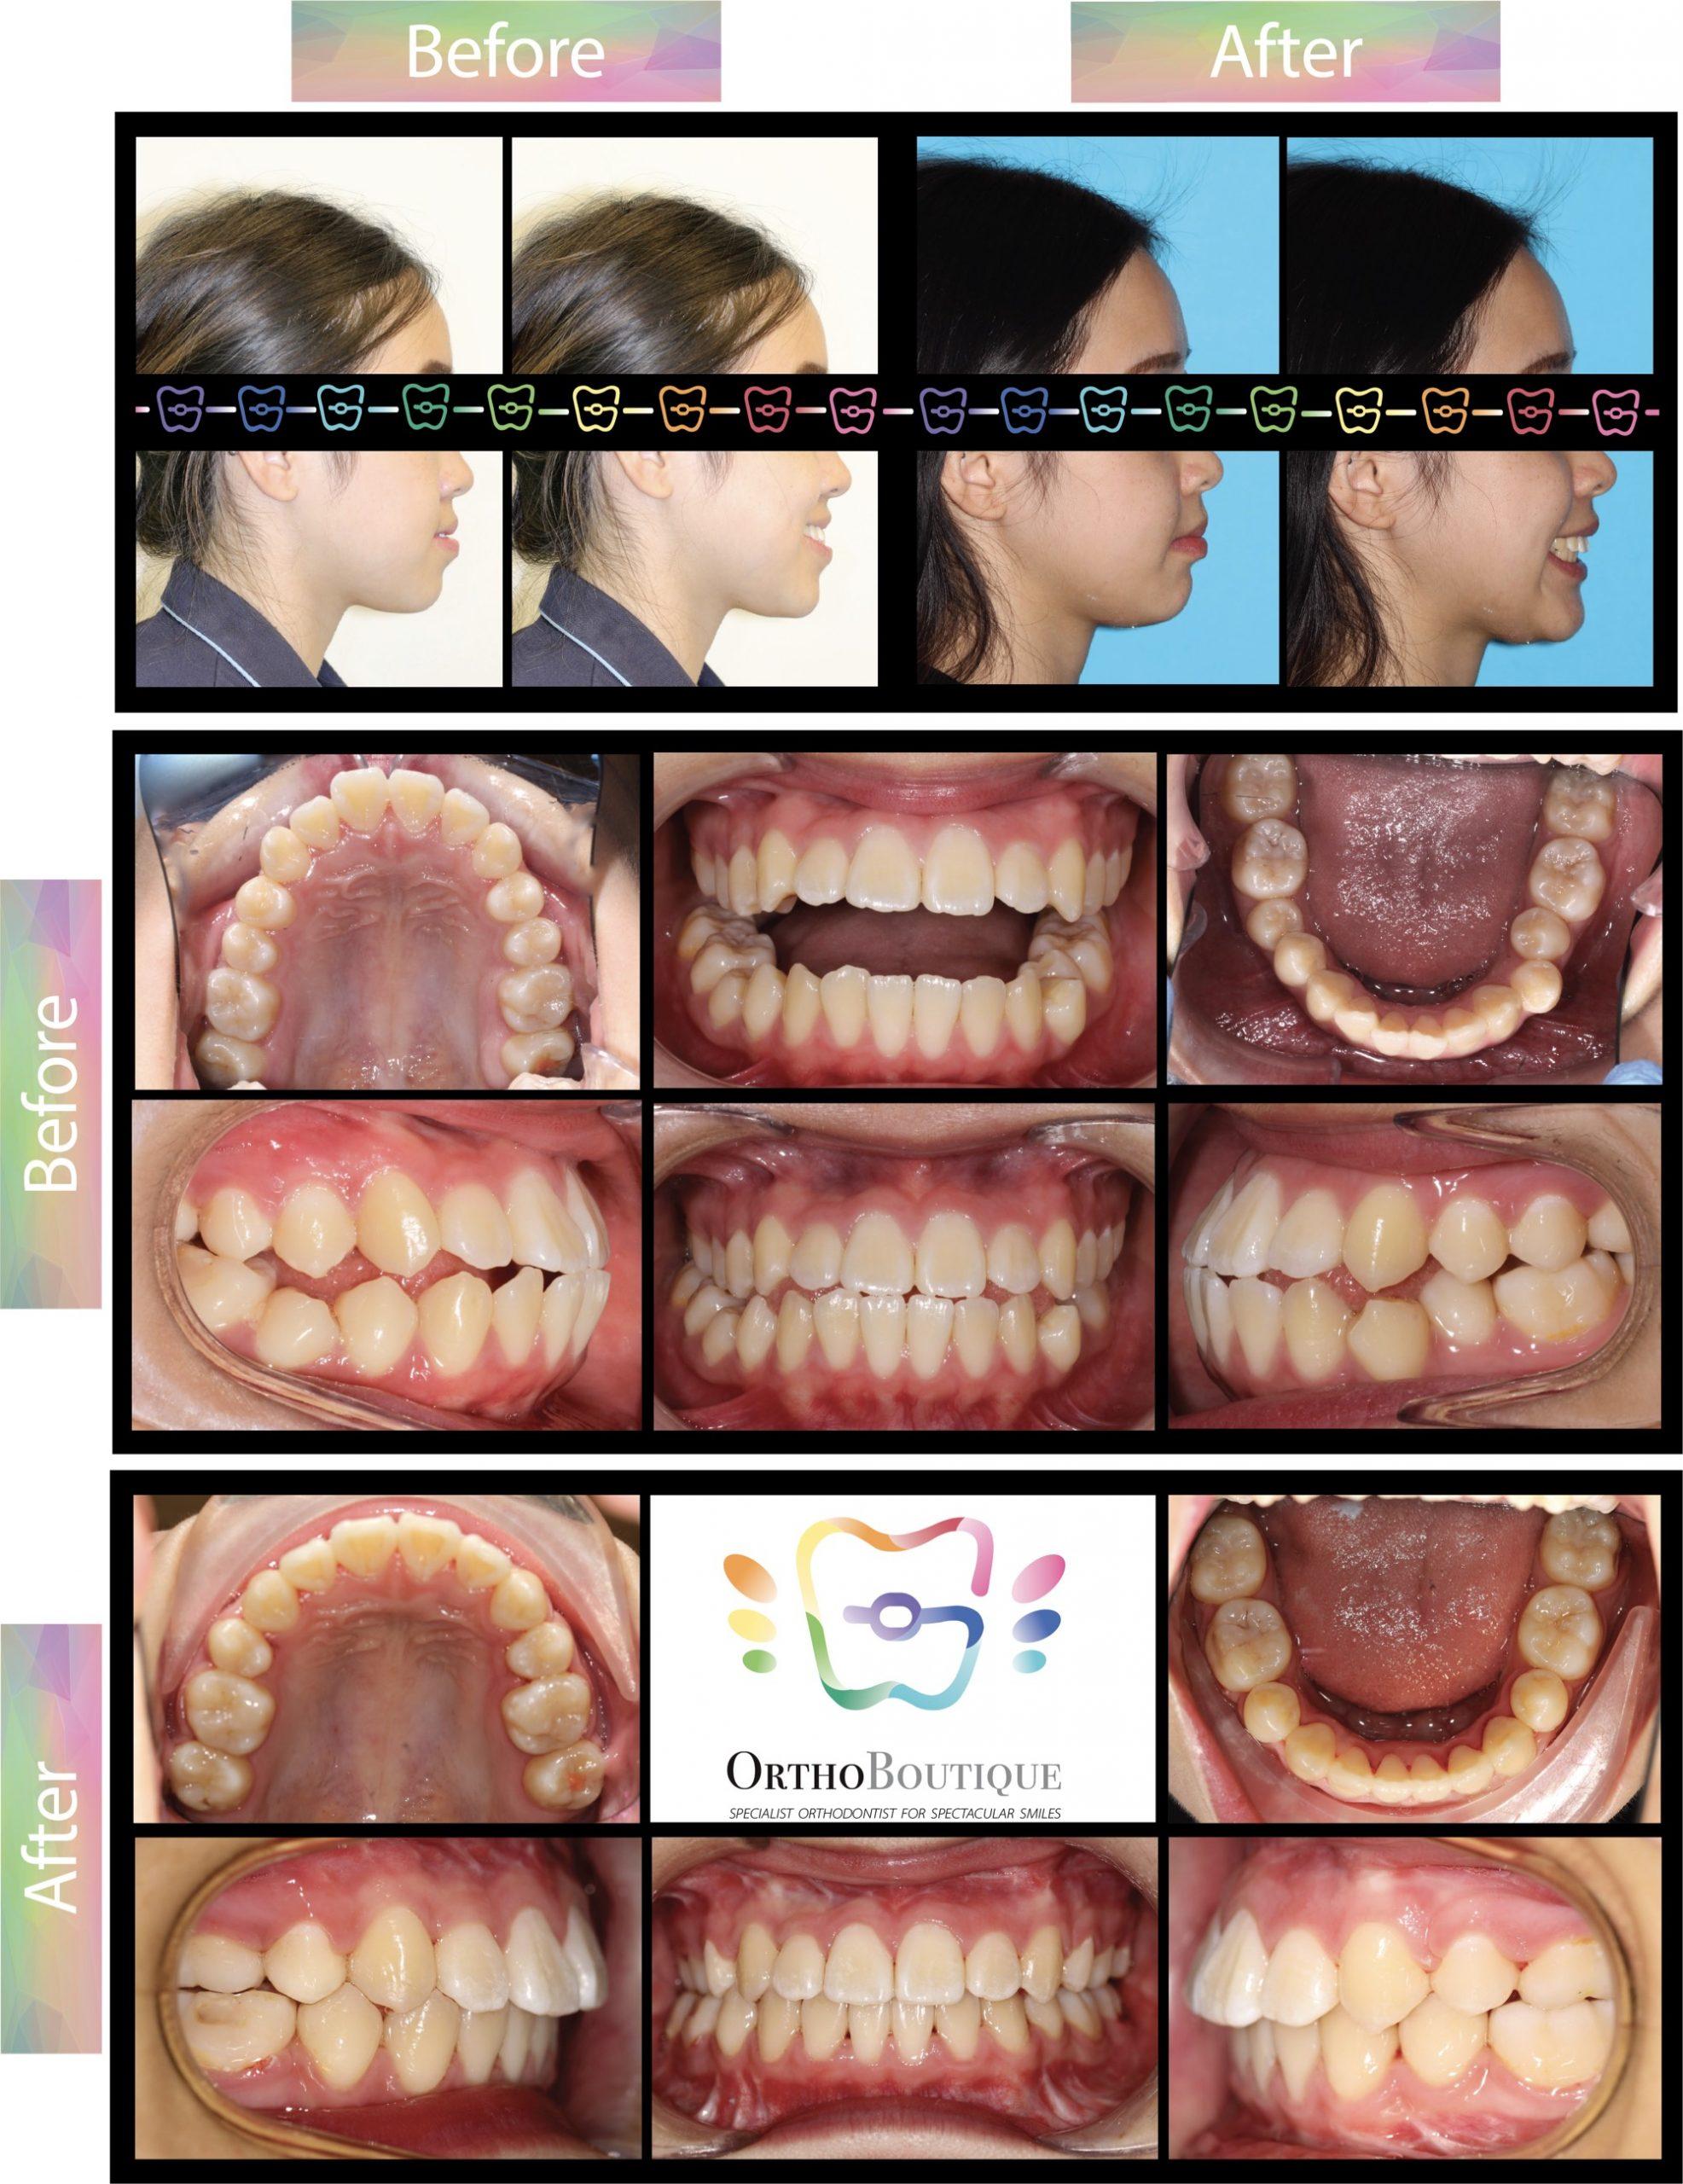 OrthoBoutique - CASE #18 Class III bite relationship, underbite, protrusive lower jaw position Before and after